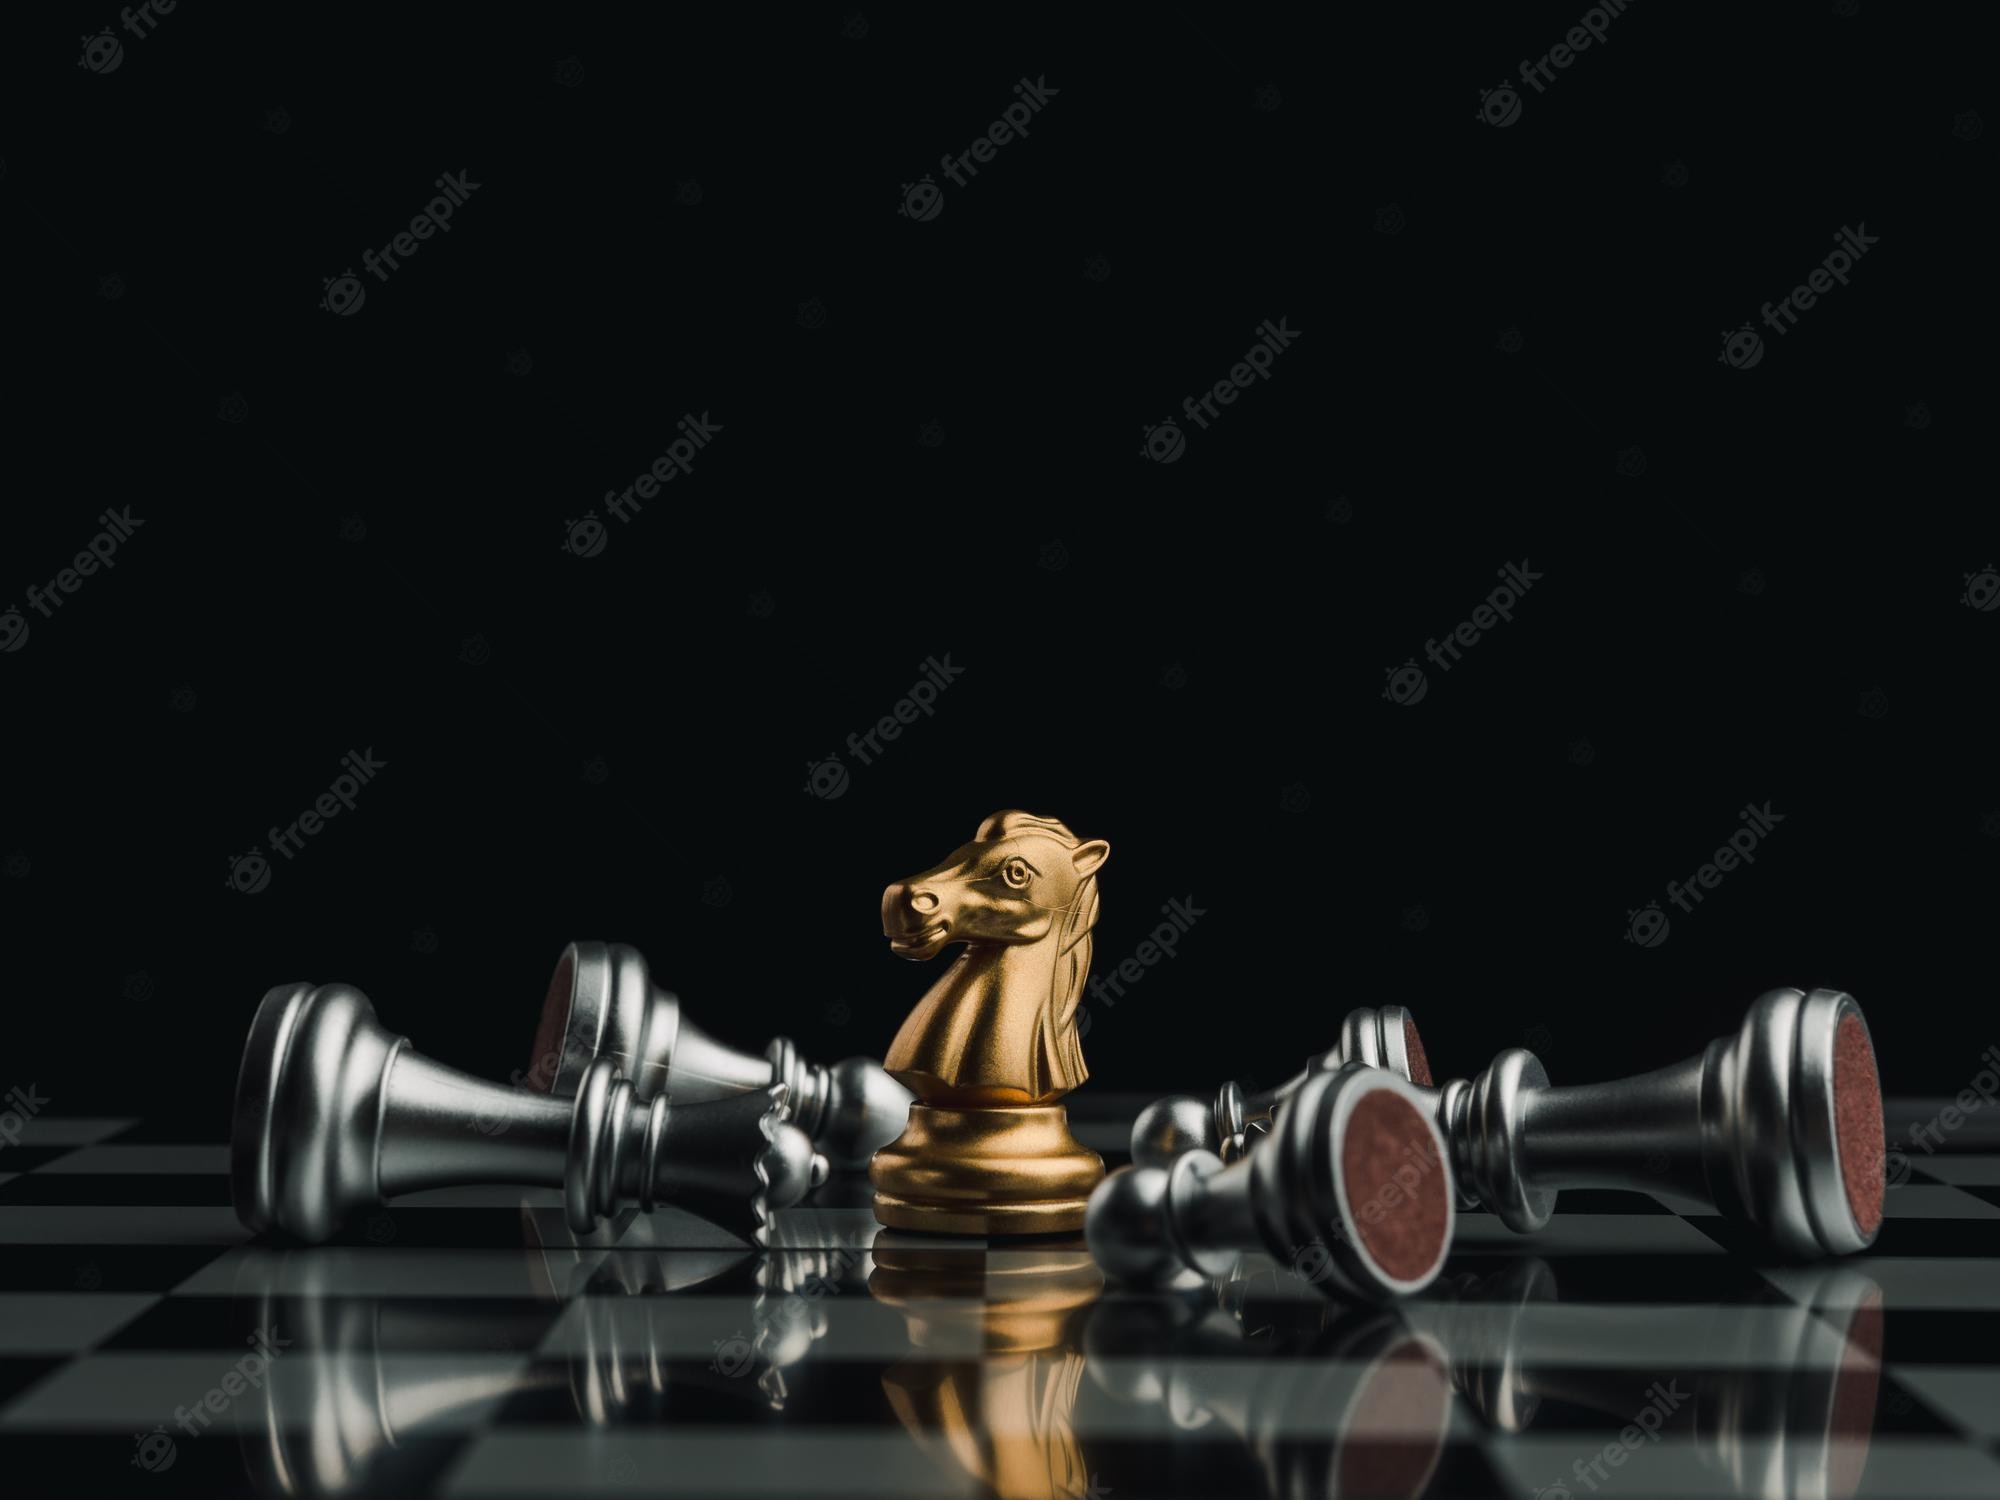 Premium Photo. The gold horse, knight chess piece standing with falling silver pawn chess pieces on chessboard on dark background. leadership, winner, competition, and business strategy concept